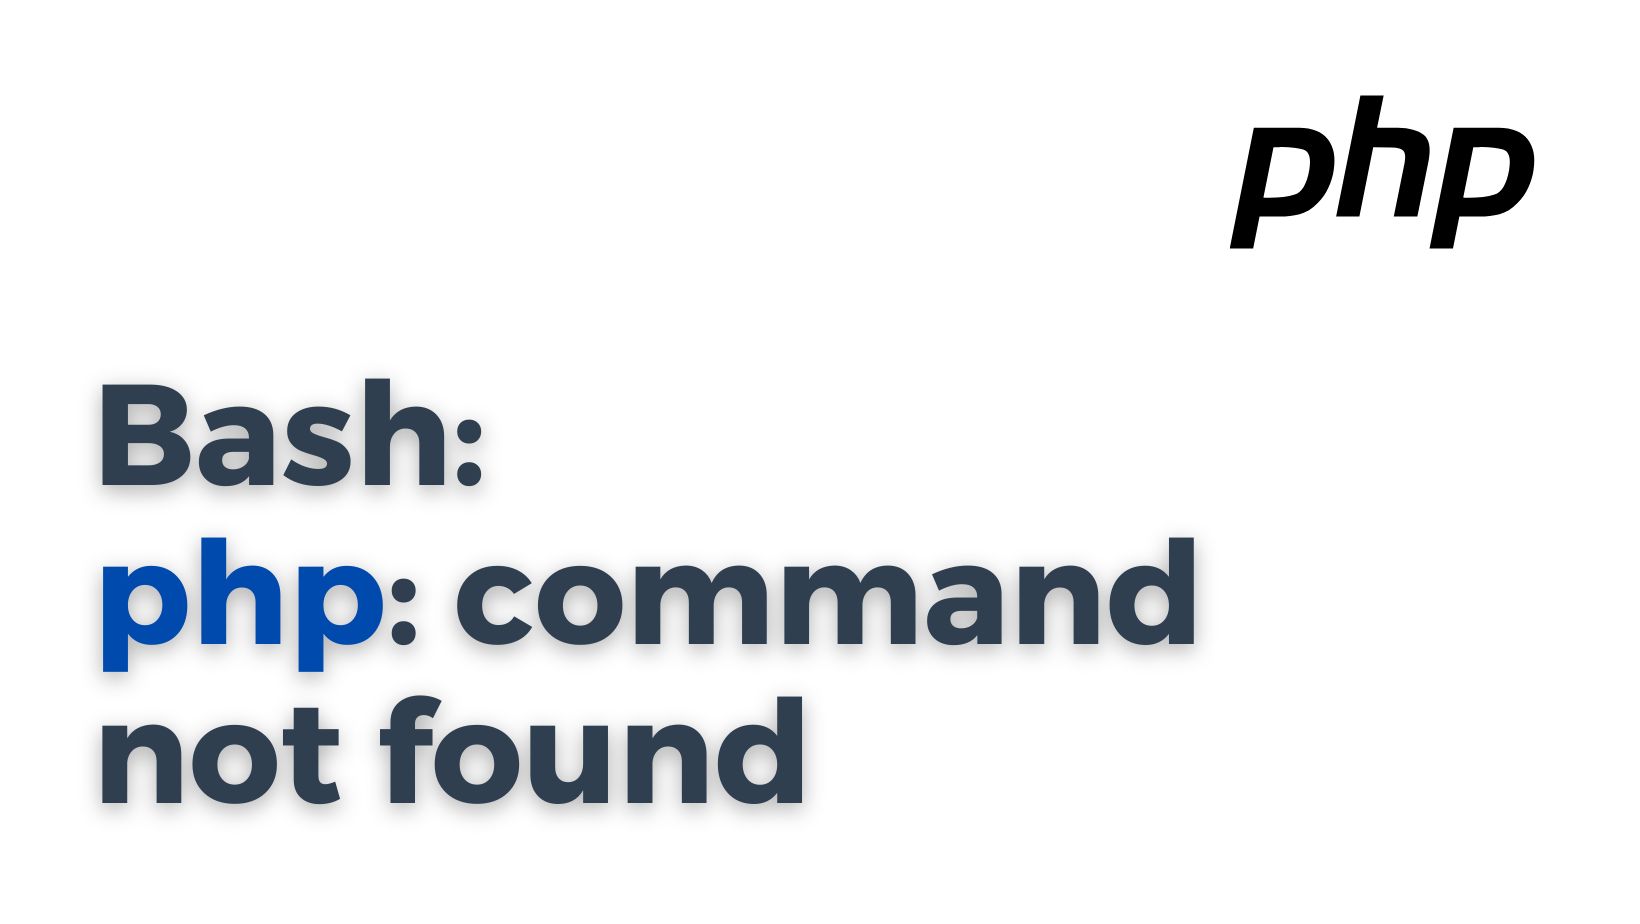 Bash: php: command not found